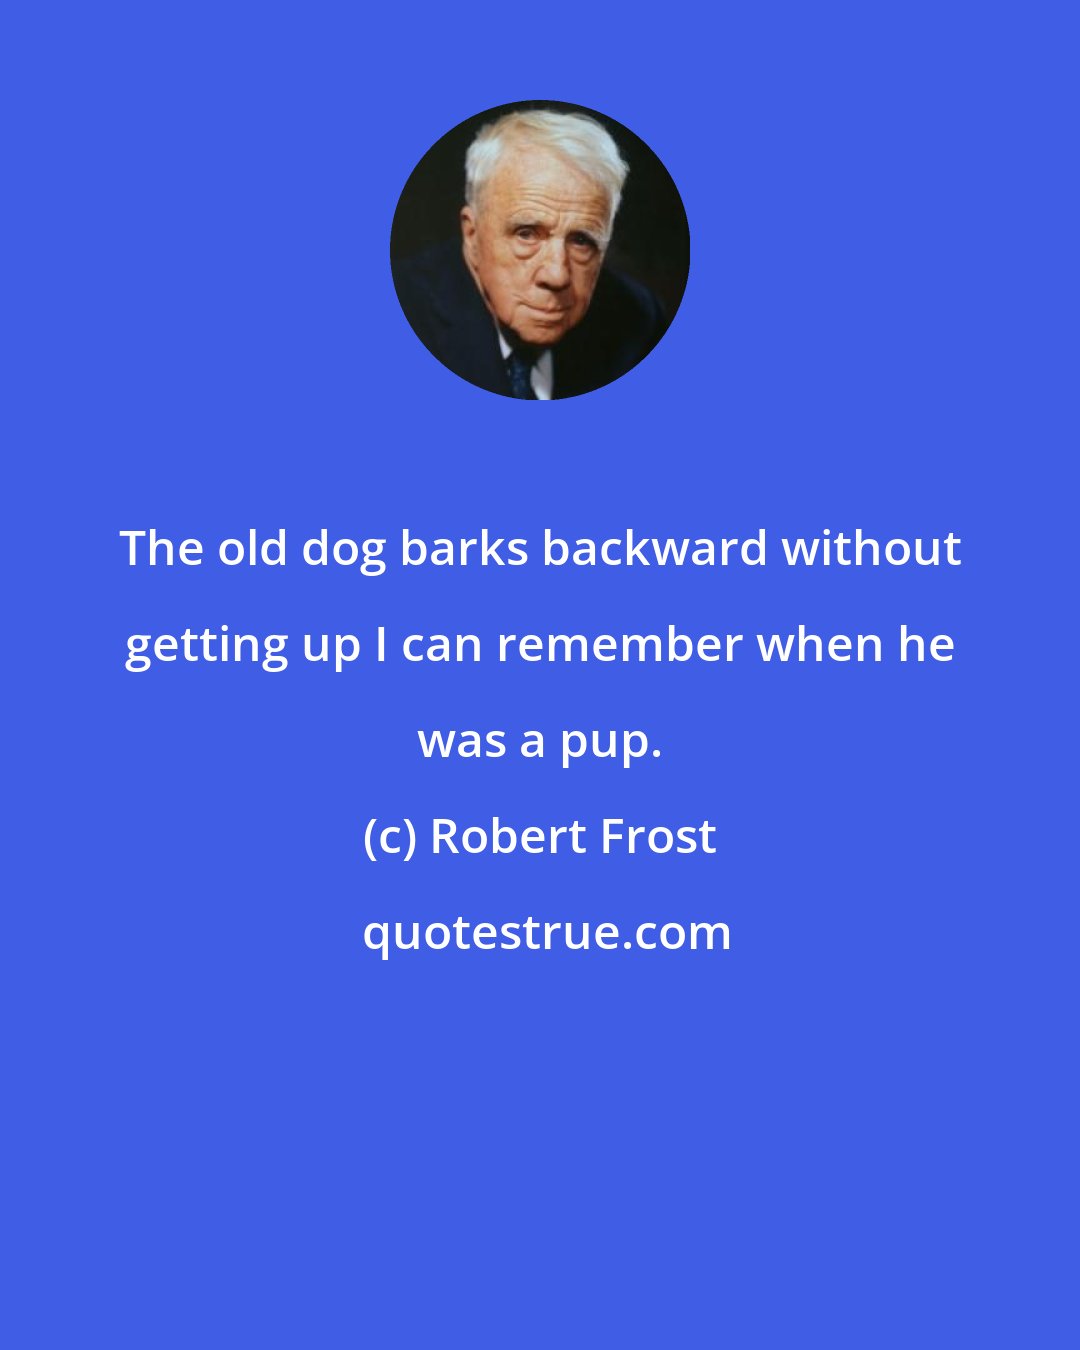 Robert Frost: The old dog barks backward without getting up I can remember when he was a pup.